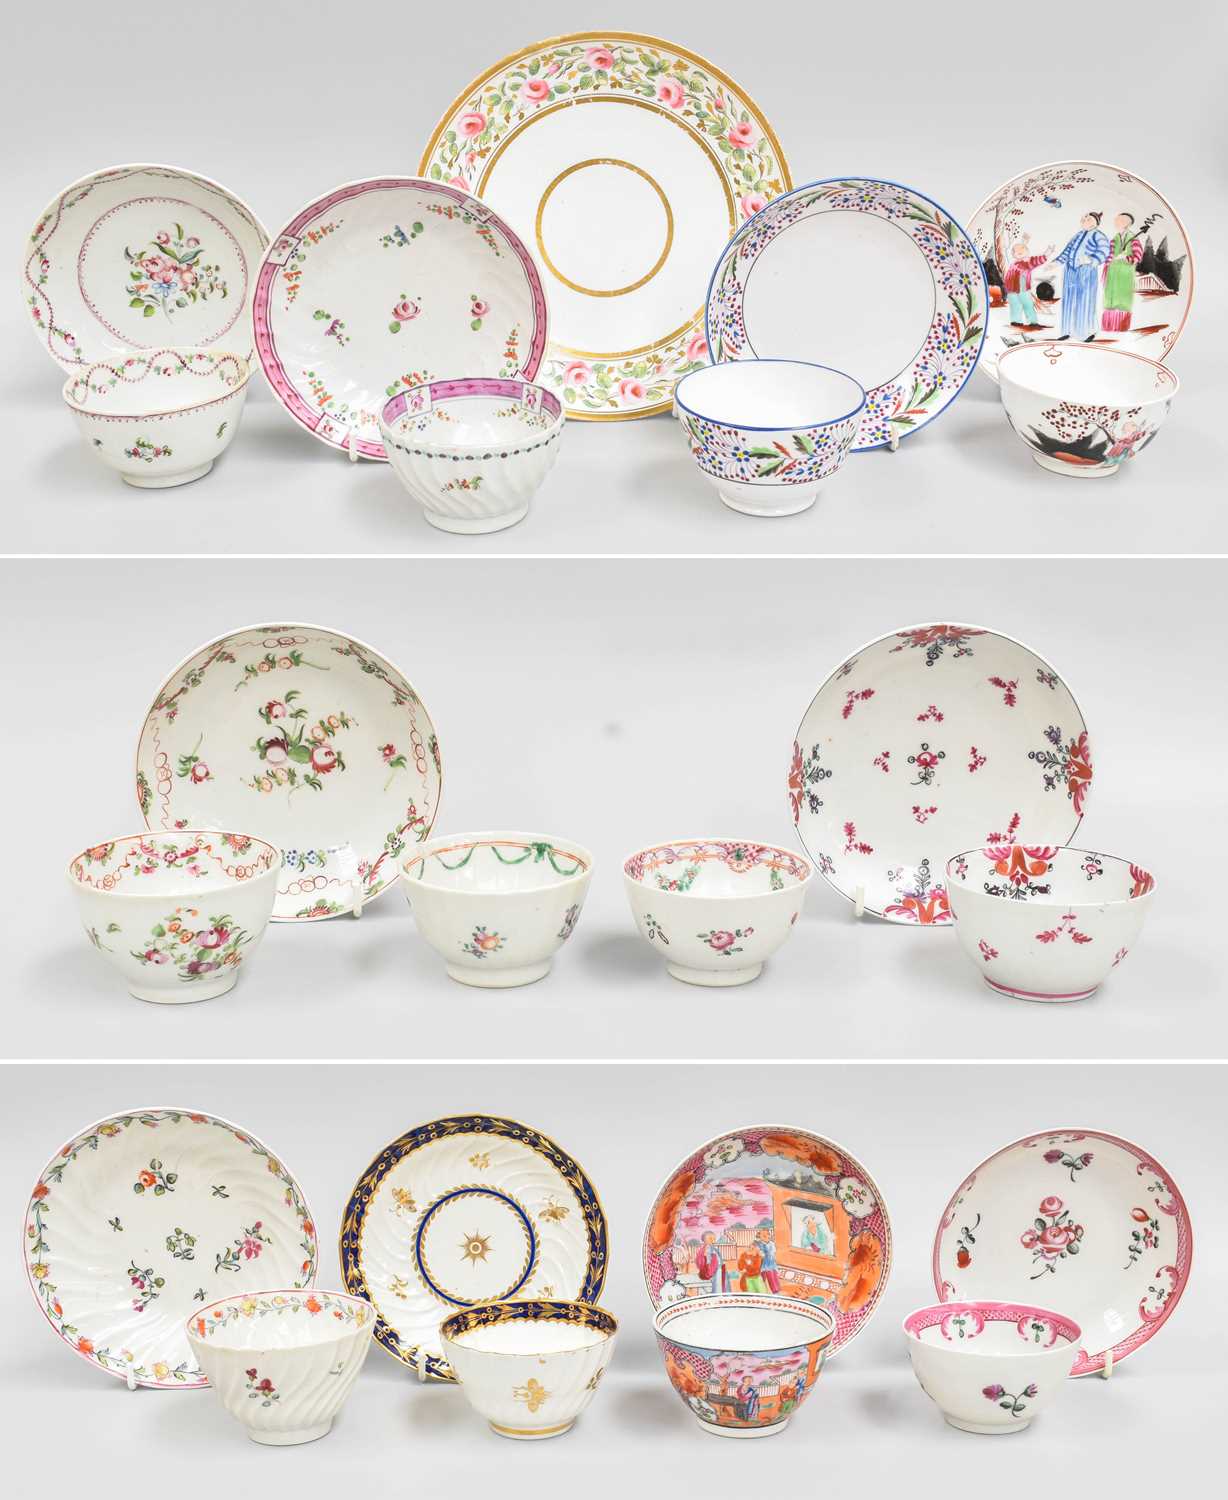 A Collection of Mainly 18th Century English Porcelain Tebowls and Saucers, including: Flight